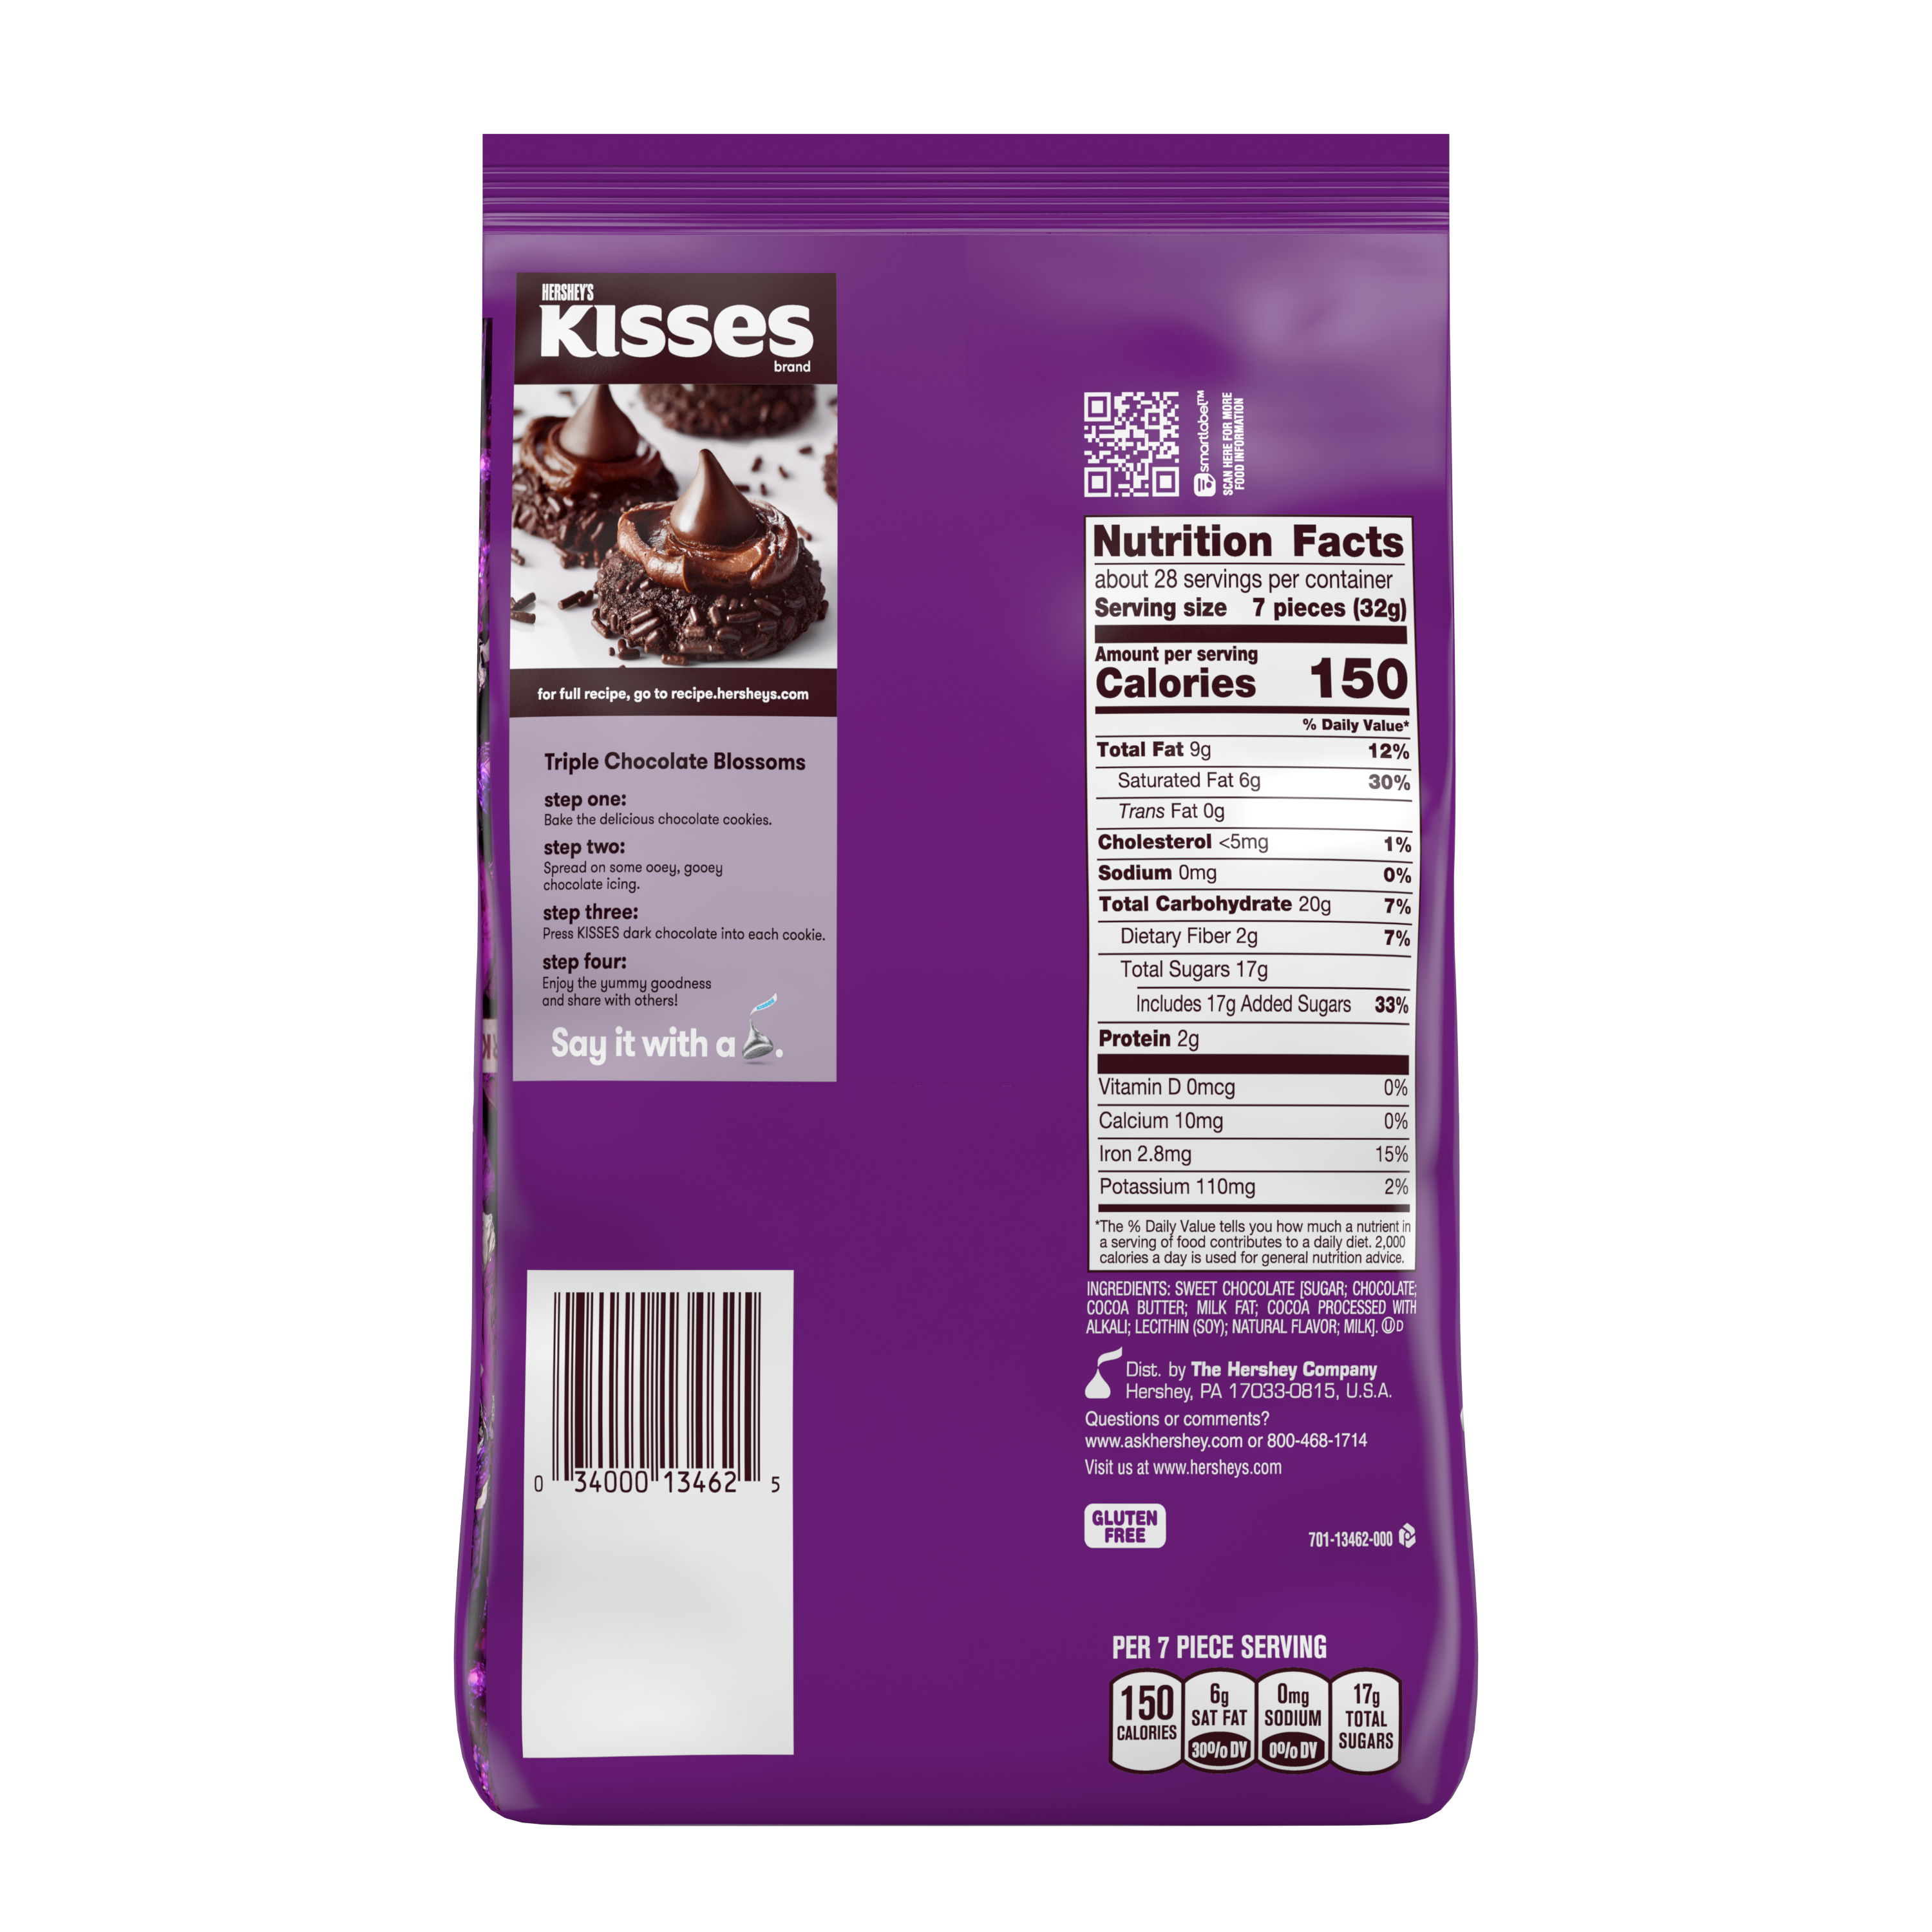 HERSHEY'S KISSES SPECIAL DARK Mildly Sweet Chocolate Candy, 32.1 oz pack - Back of Package